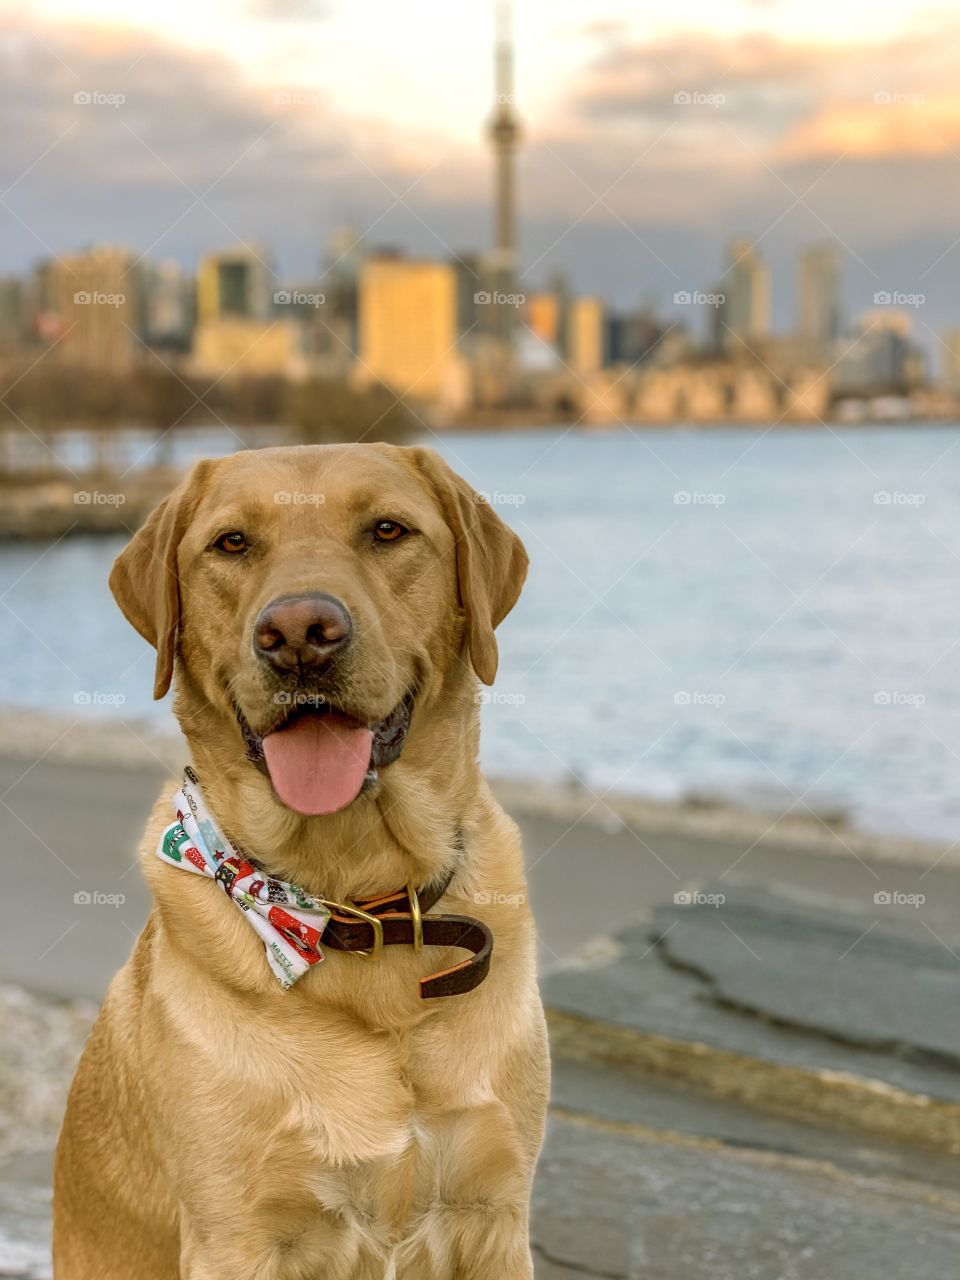 Out for a walk on along the lakeshore with the only good boy around for miles, and he knows it! 